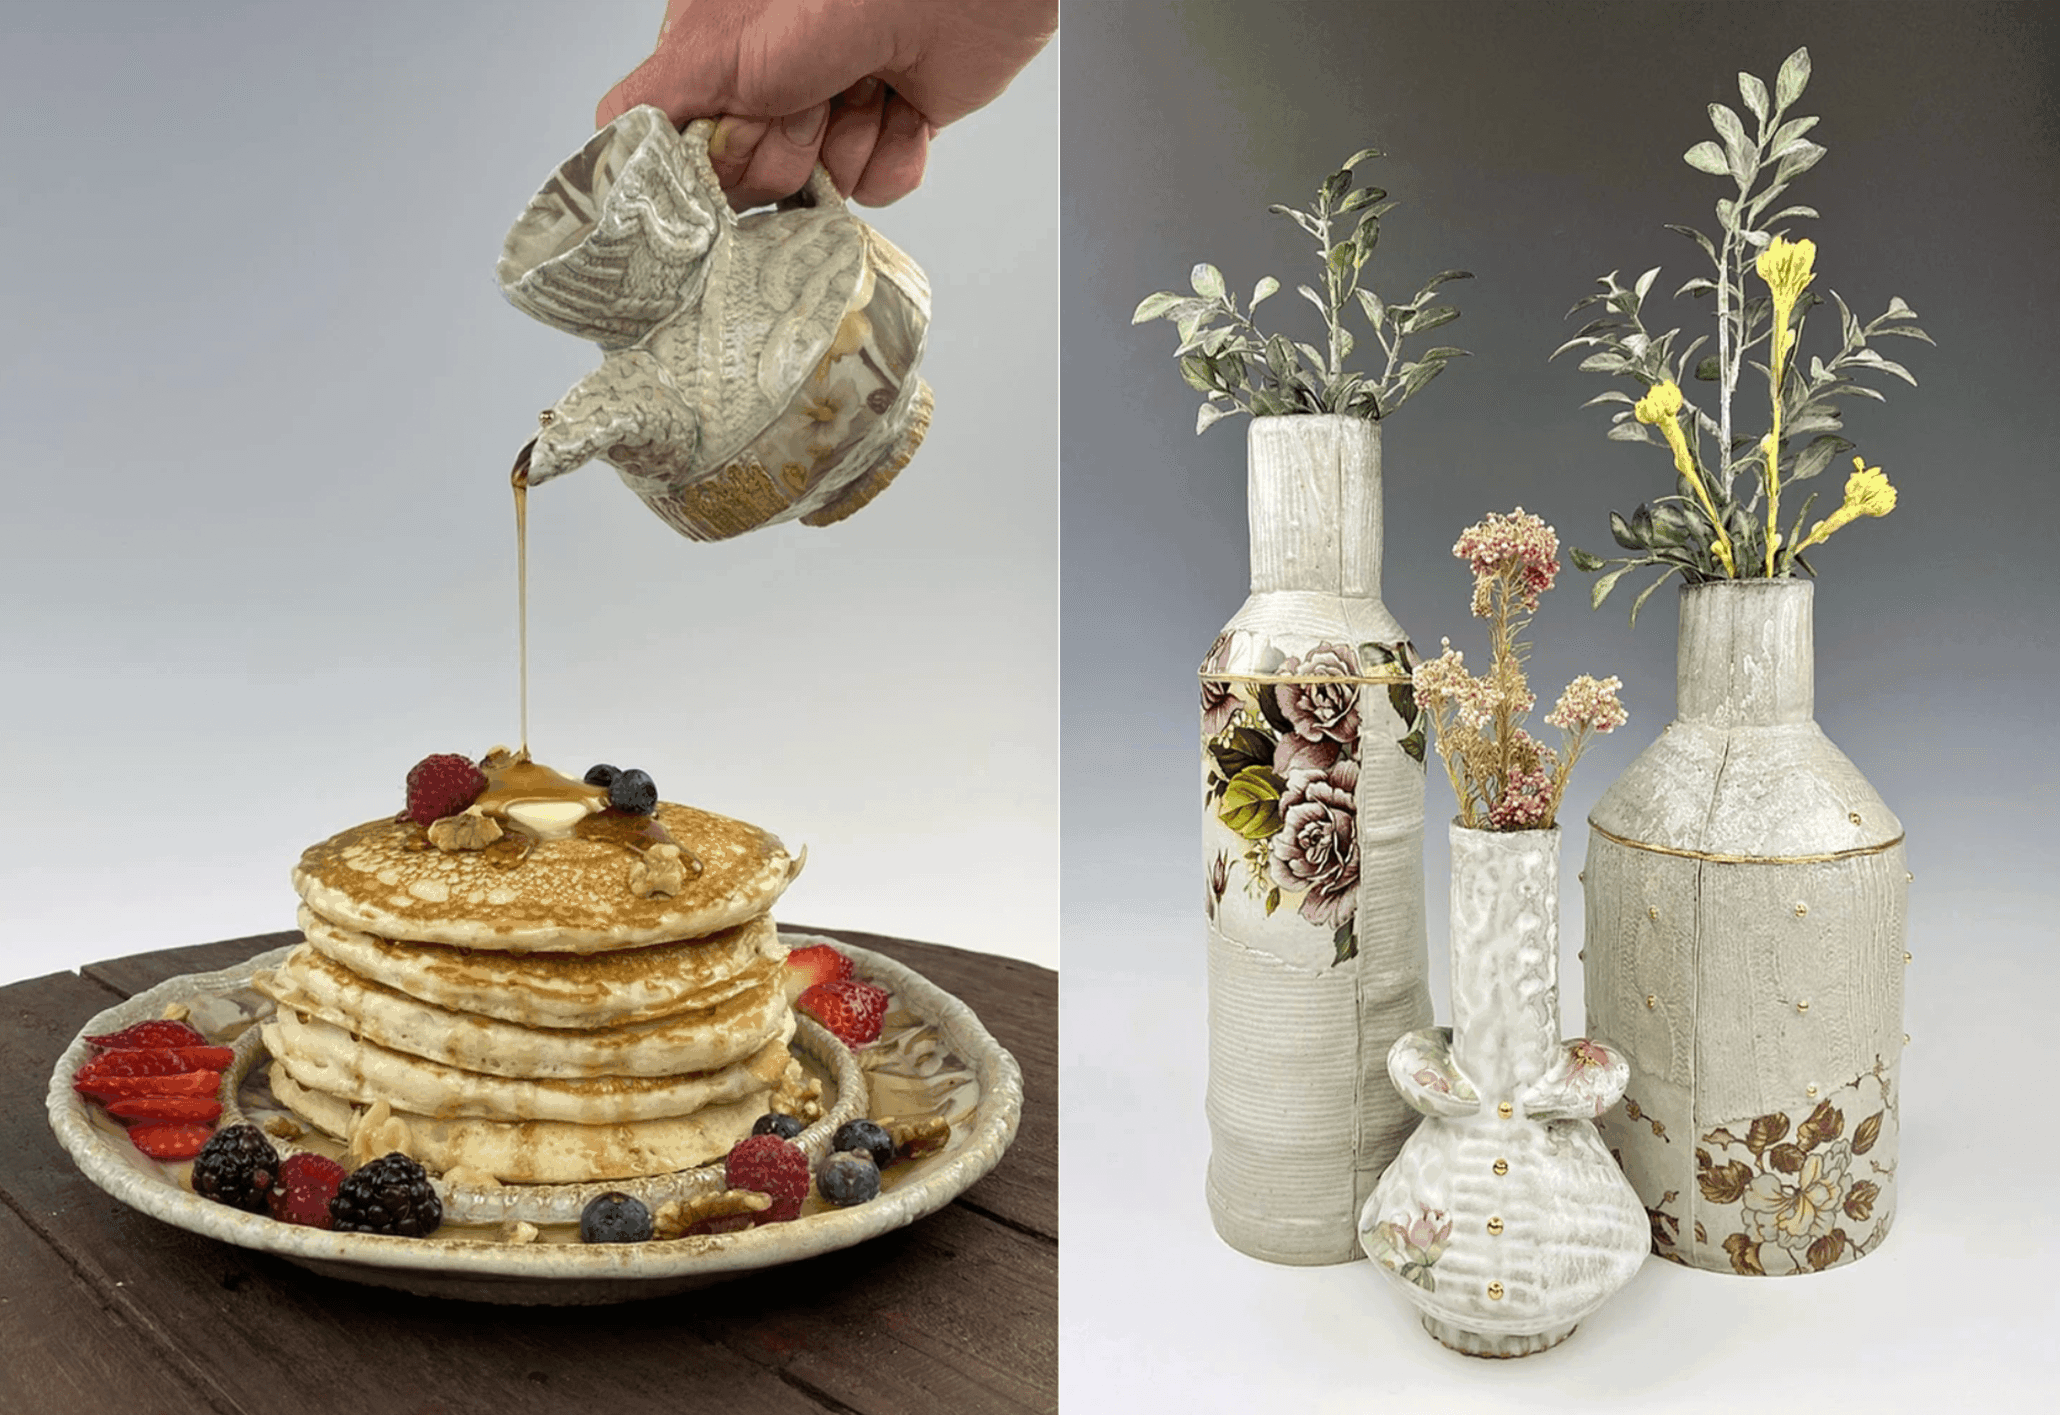 A diptych of hand-built ceramics. Left: Pancakes sit atop a decorated ceramic plate as a matching ceramic vessel pours syrup on top. Right: Three ceramic vases with floral decals hold sprigs of flowers